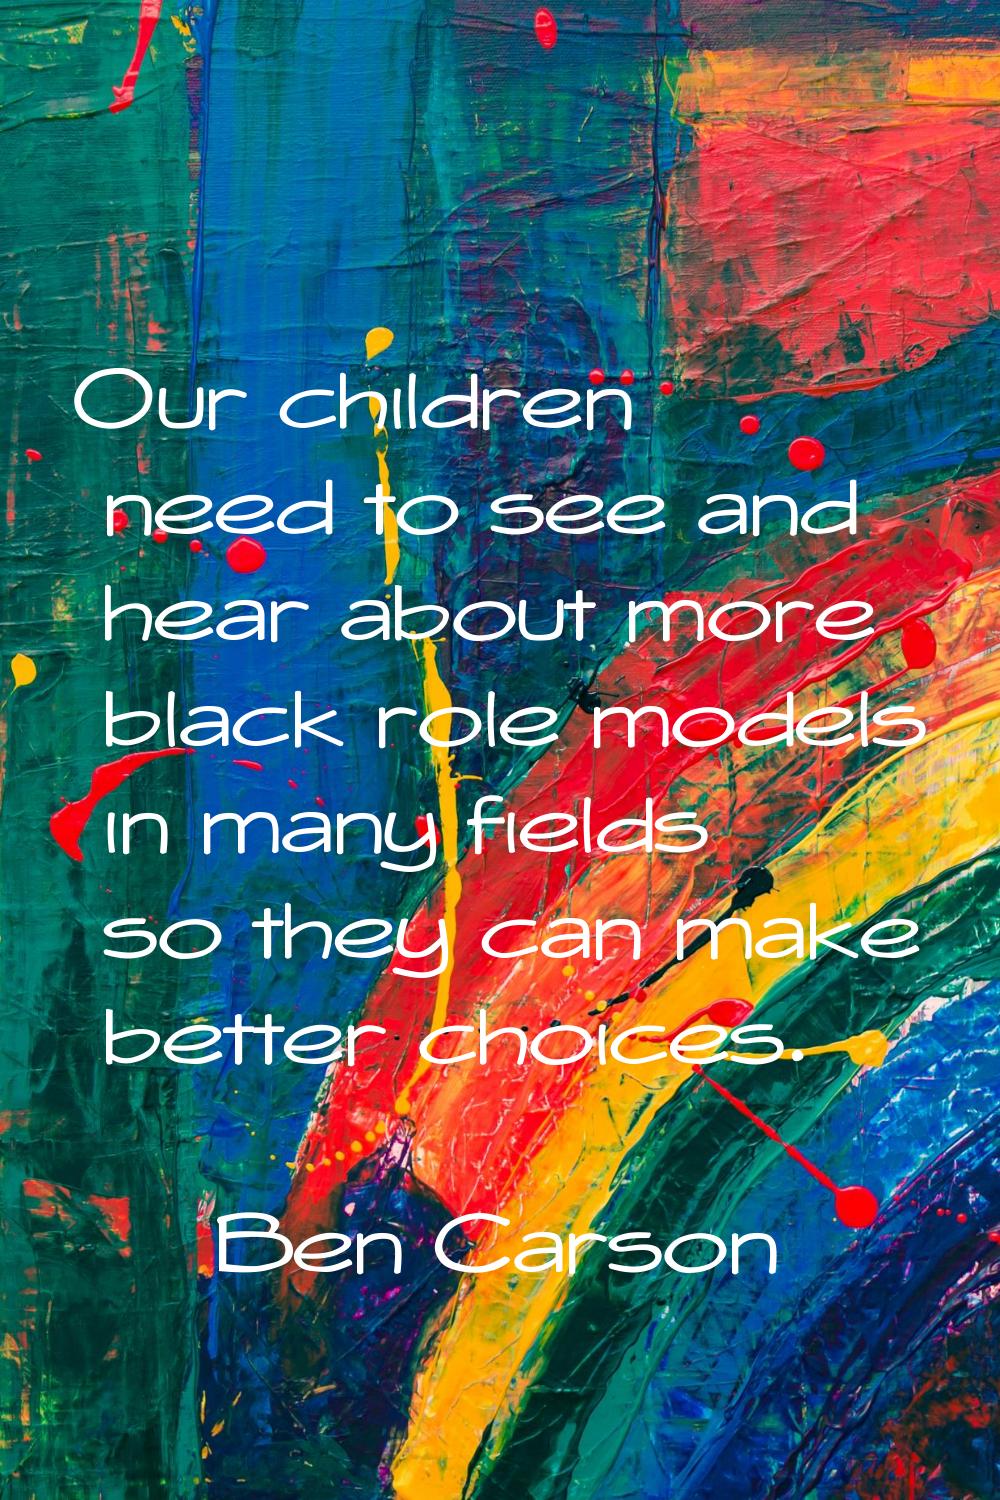 Our children need to see and hear about more black role models in many fields so they can make bett